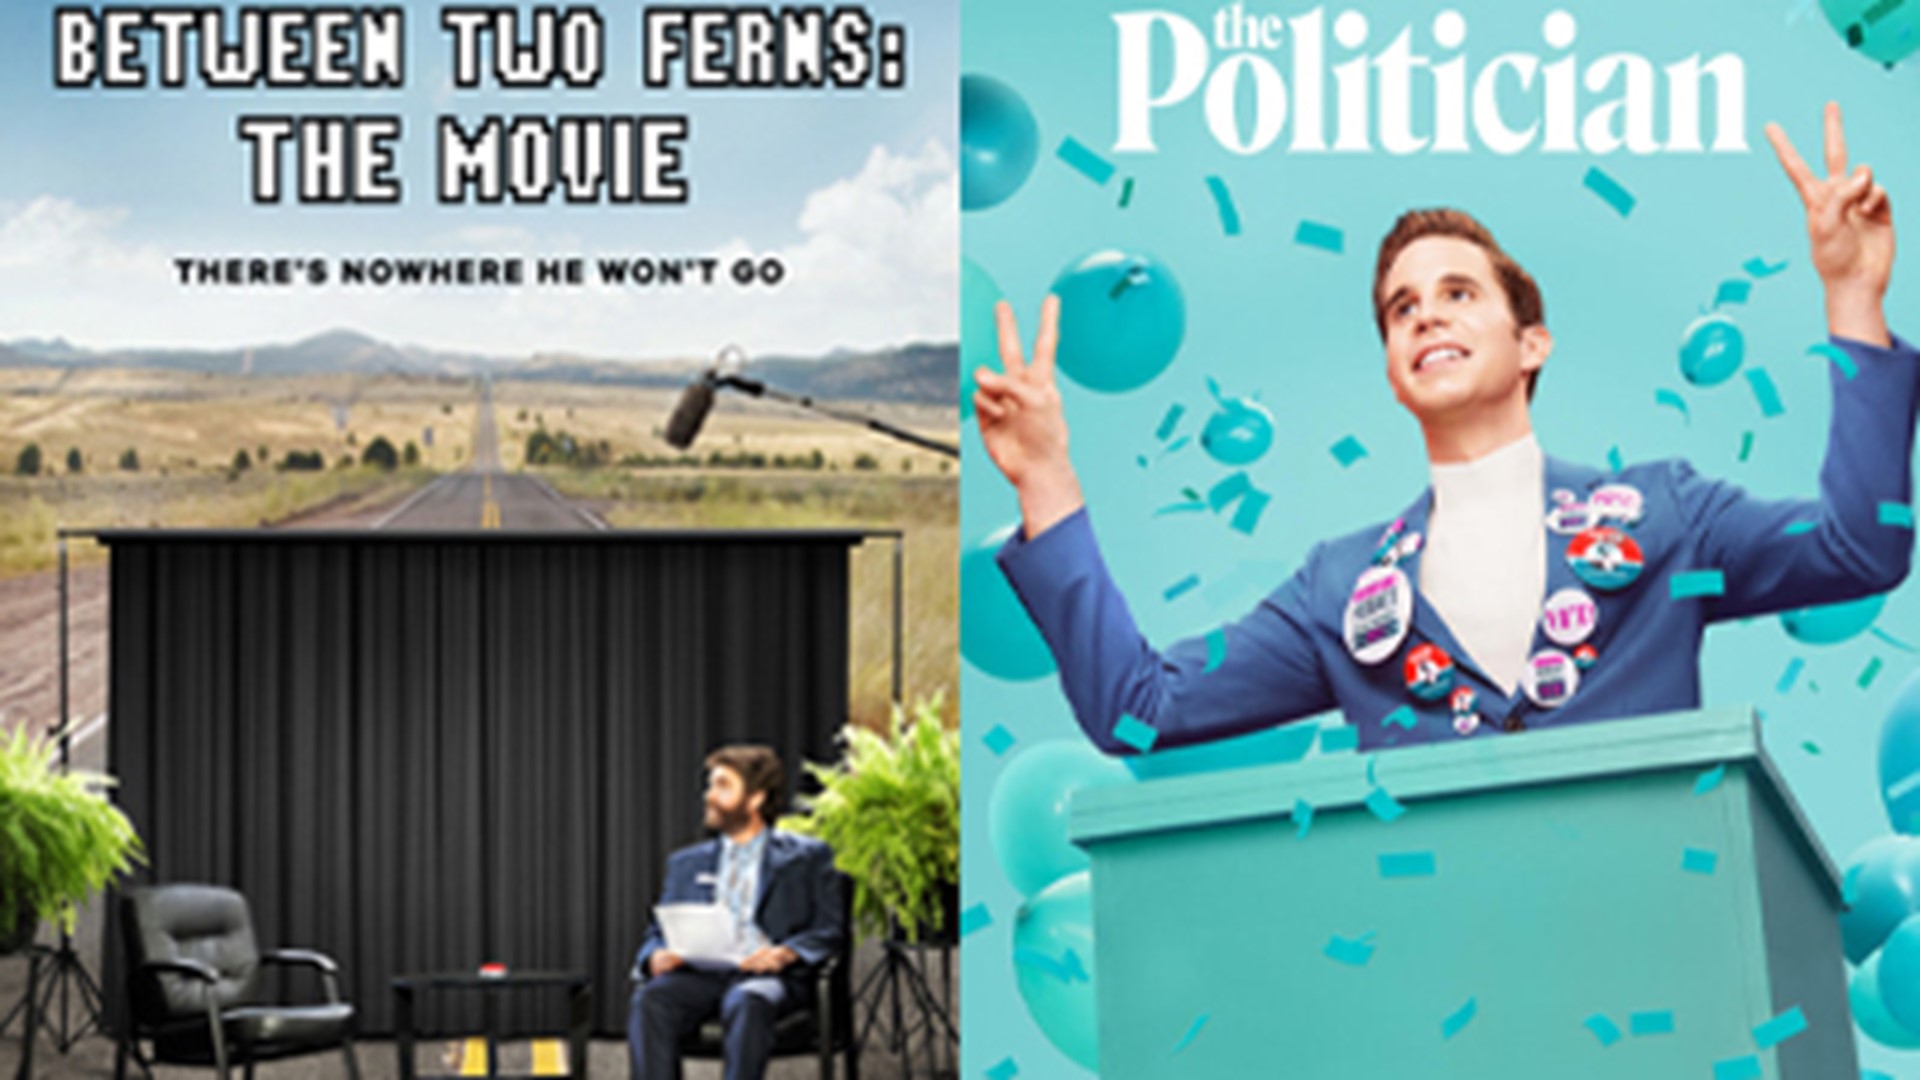 Extra Butter reviews new Netflix Originals: 'Between Two Ferns: The Movie' and 'The Politician.' Plus, hear from Zach Galifianakis, Ben Platt, Zoey Deutch, and more.